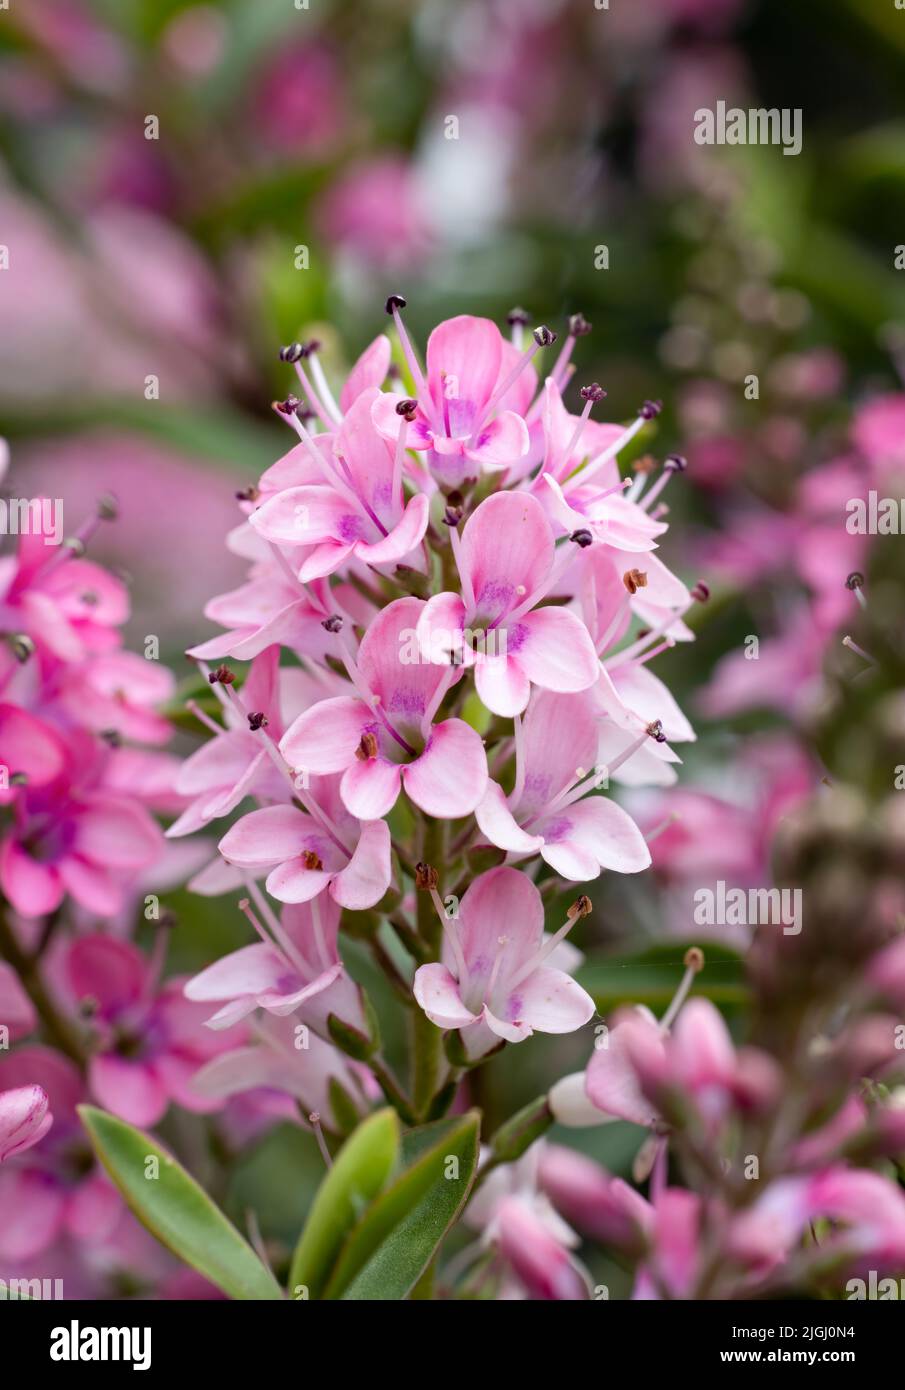 Beautiful pink flowers of a Hebe plant Stock Photo